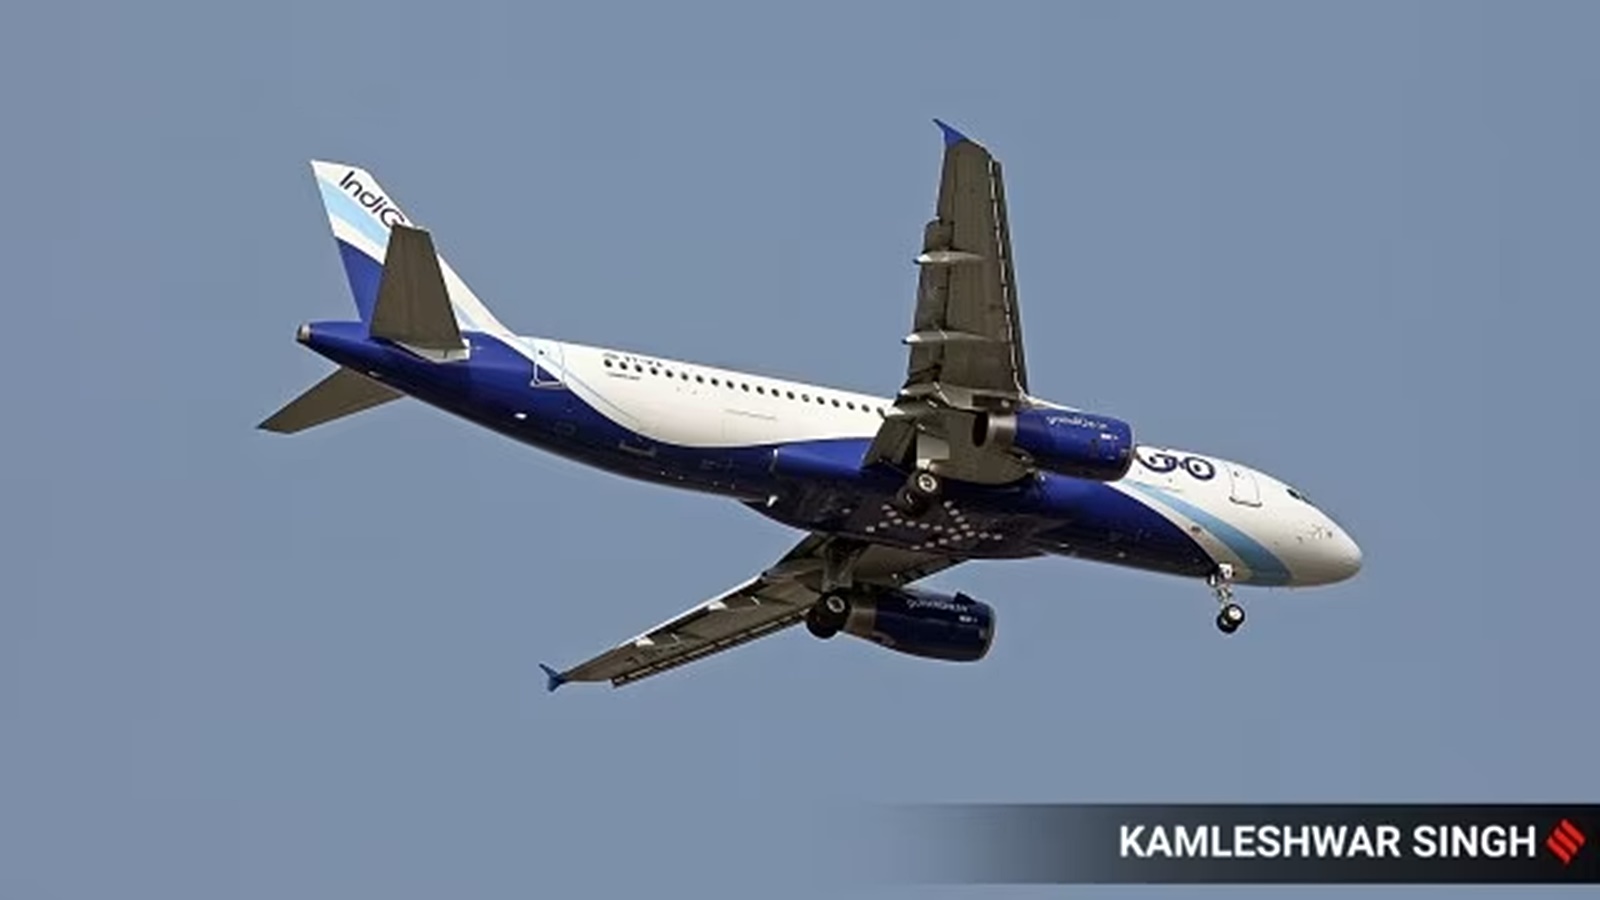 android, close shave: 2 indigo planes came dangerously close over delhi airport in november; probe on